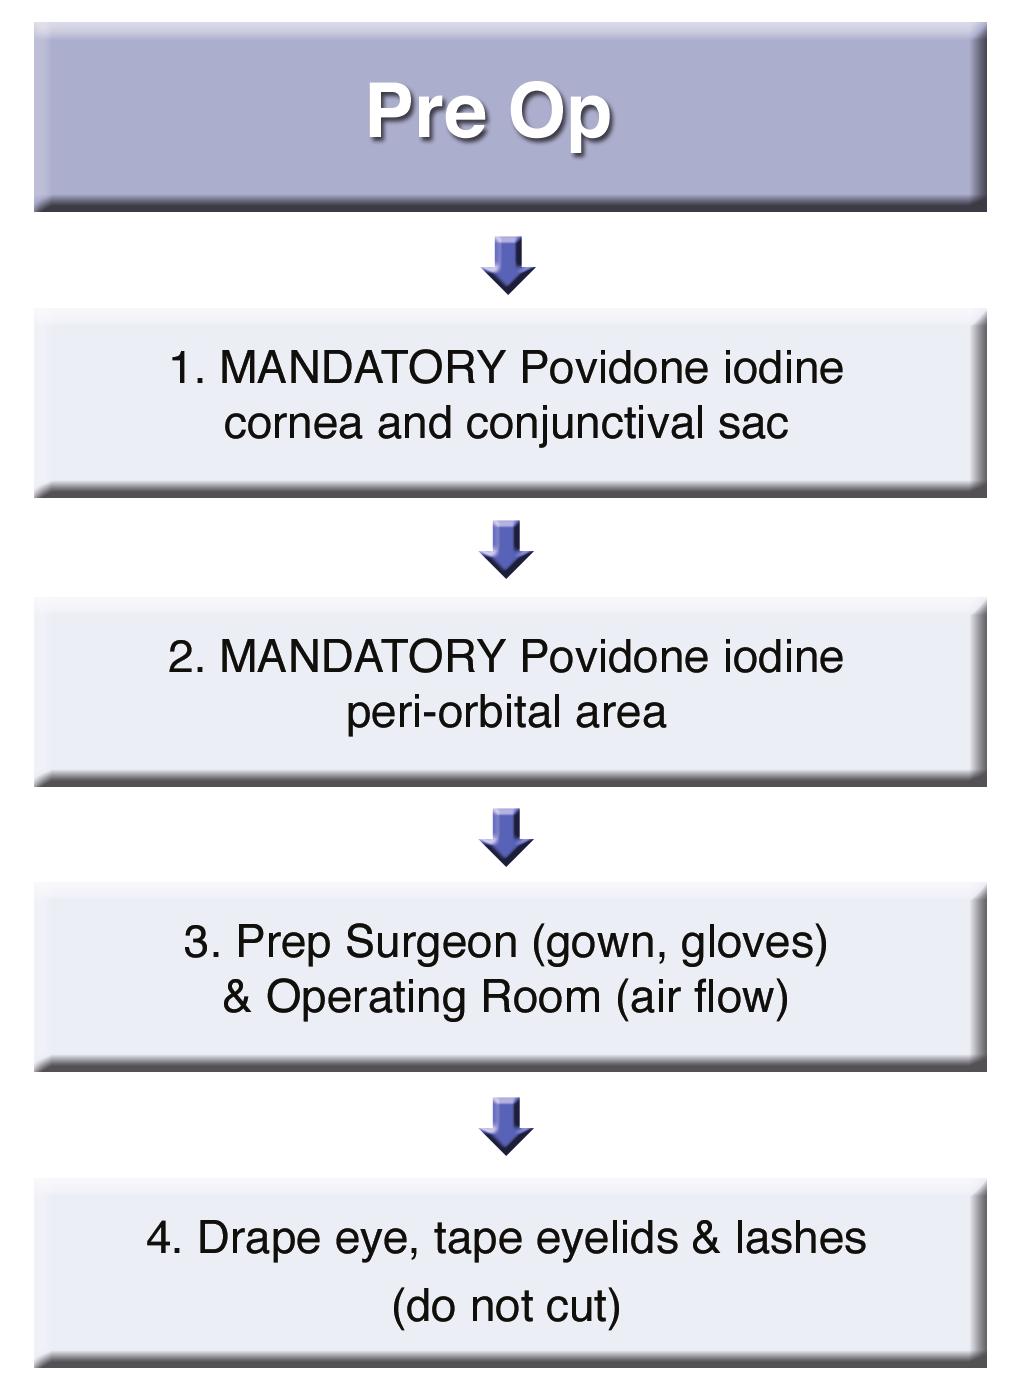 10 PREOPERATIVE ANTISEPSIS A) POVIDONE-IODINE (PVI) More than any other form of preoperative antisepsis, the literature supports the essential role of PVI for ocular surface preparation prior to